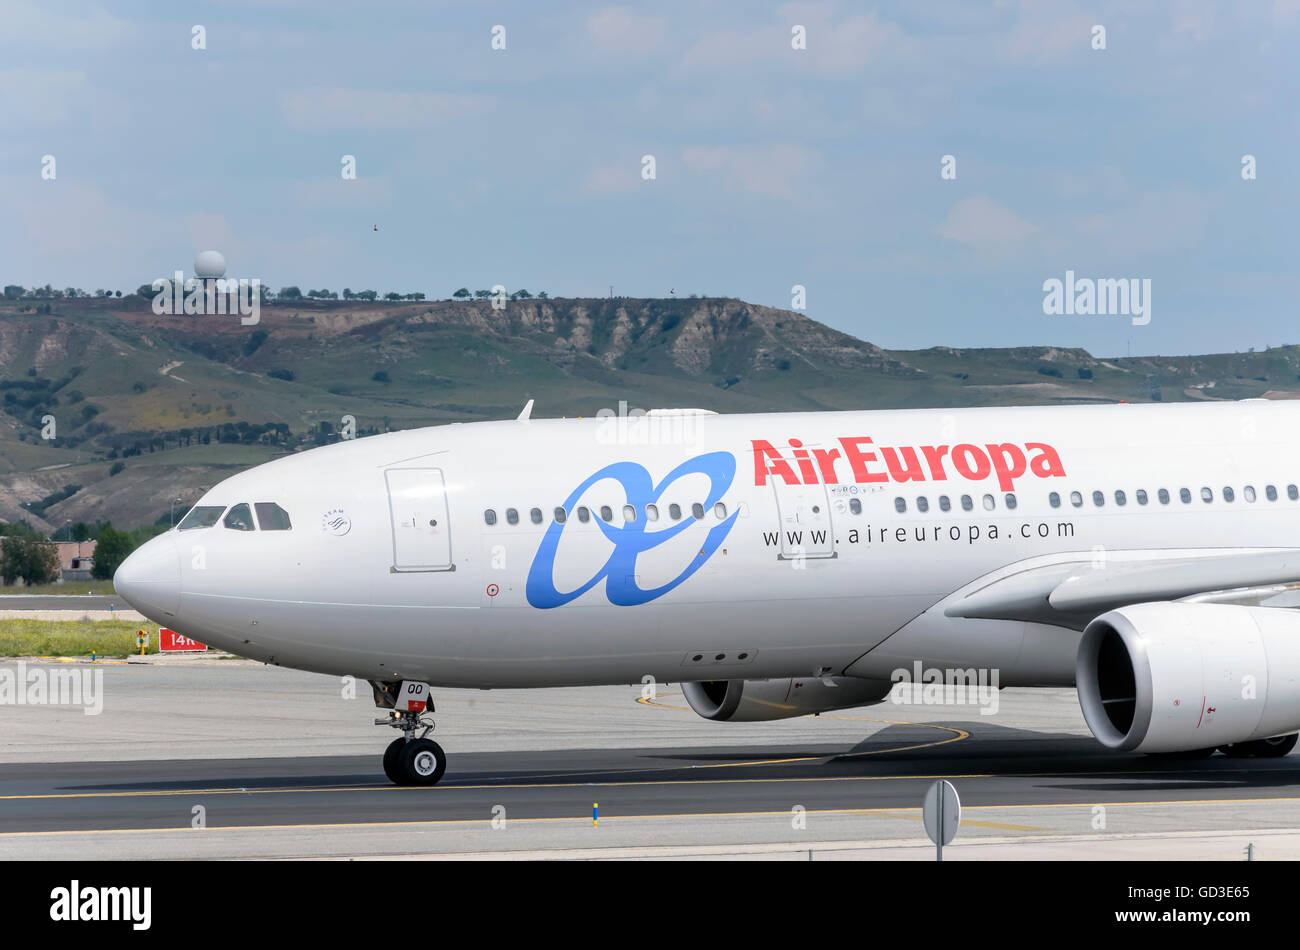 Plane -Airbus A330- of -Air Europa- airline, direction to runway of Madrid-Barajas -Adolfo Suarez airport, ready to take off Stock Photo